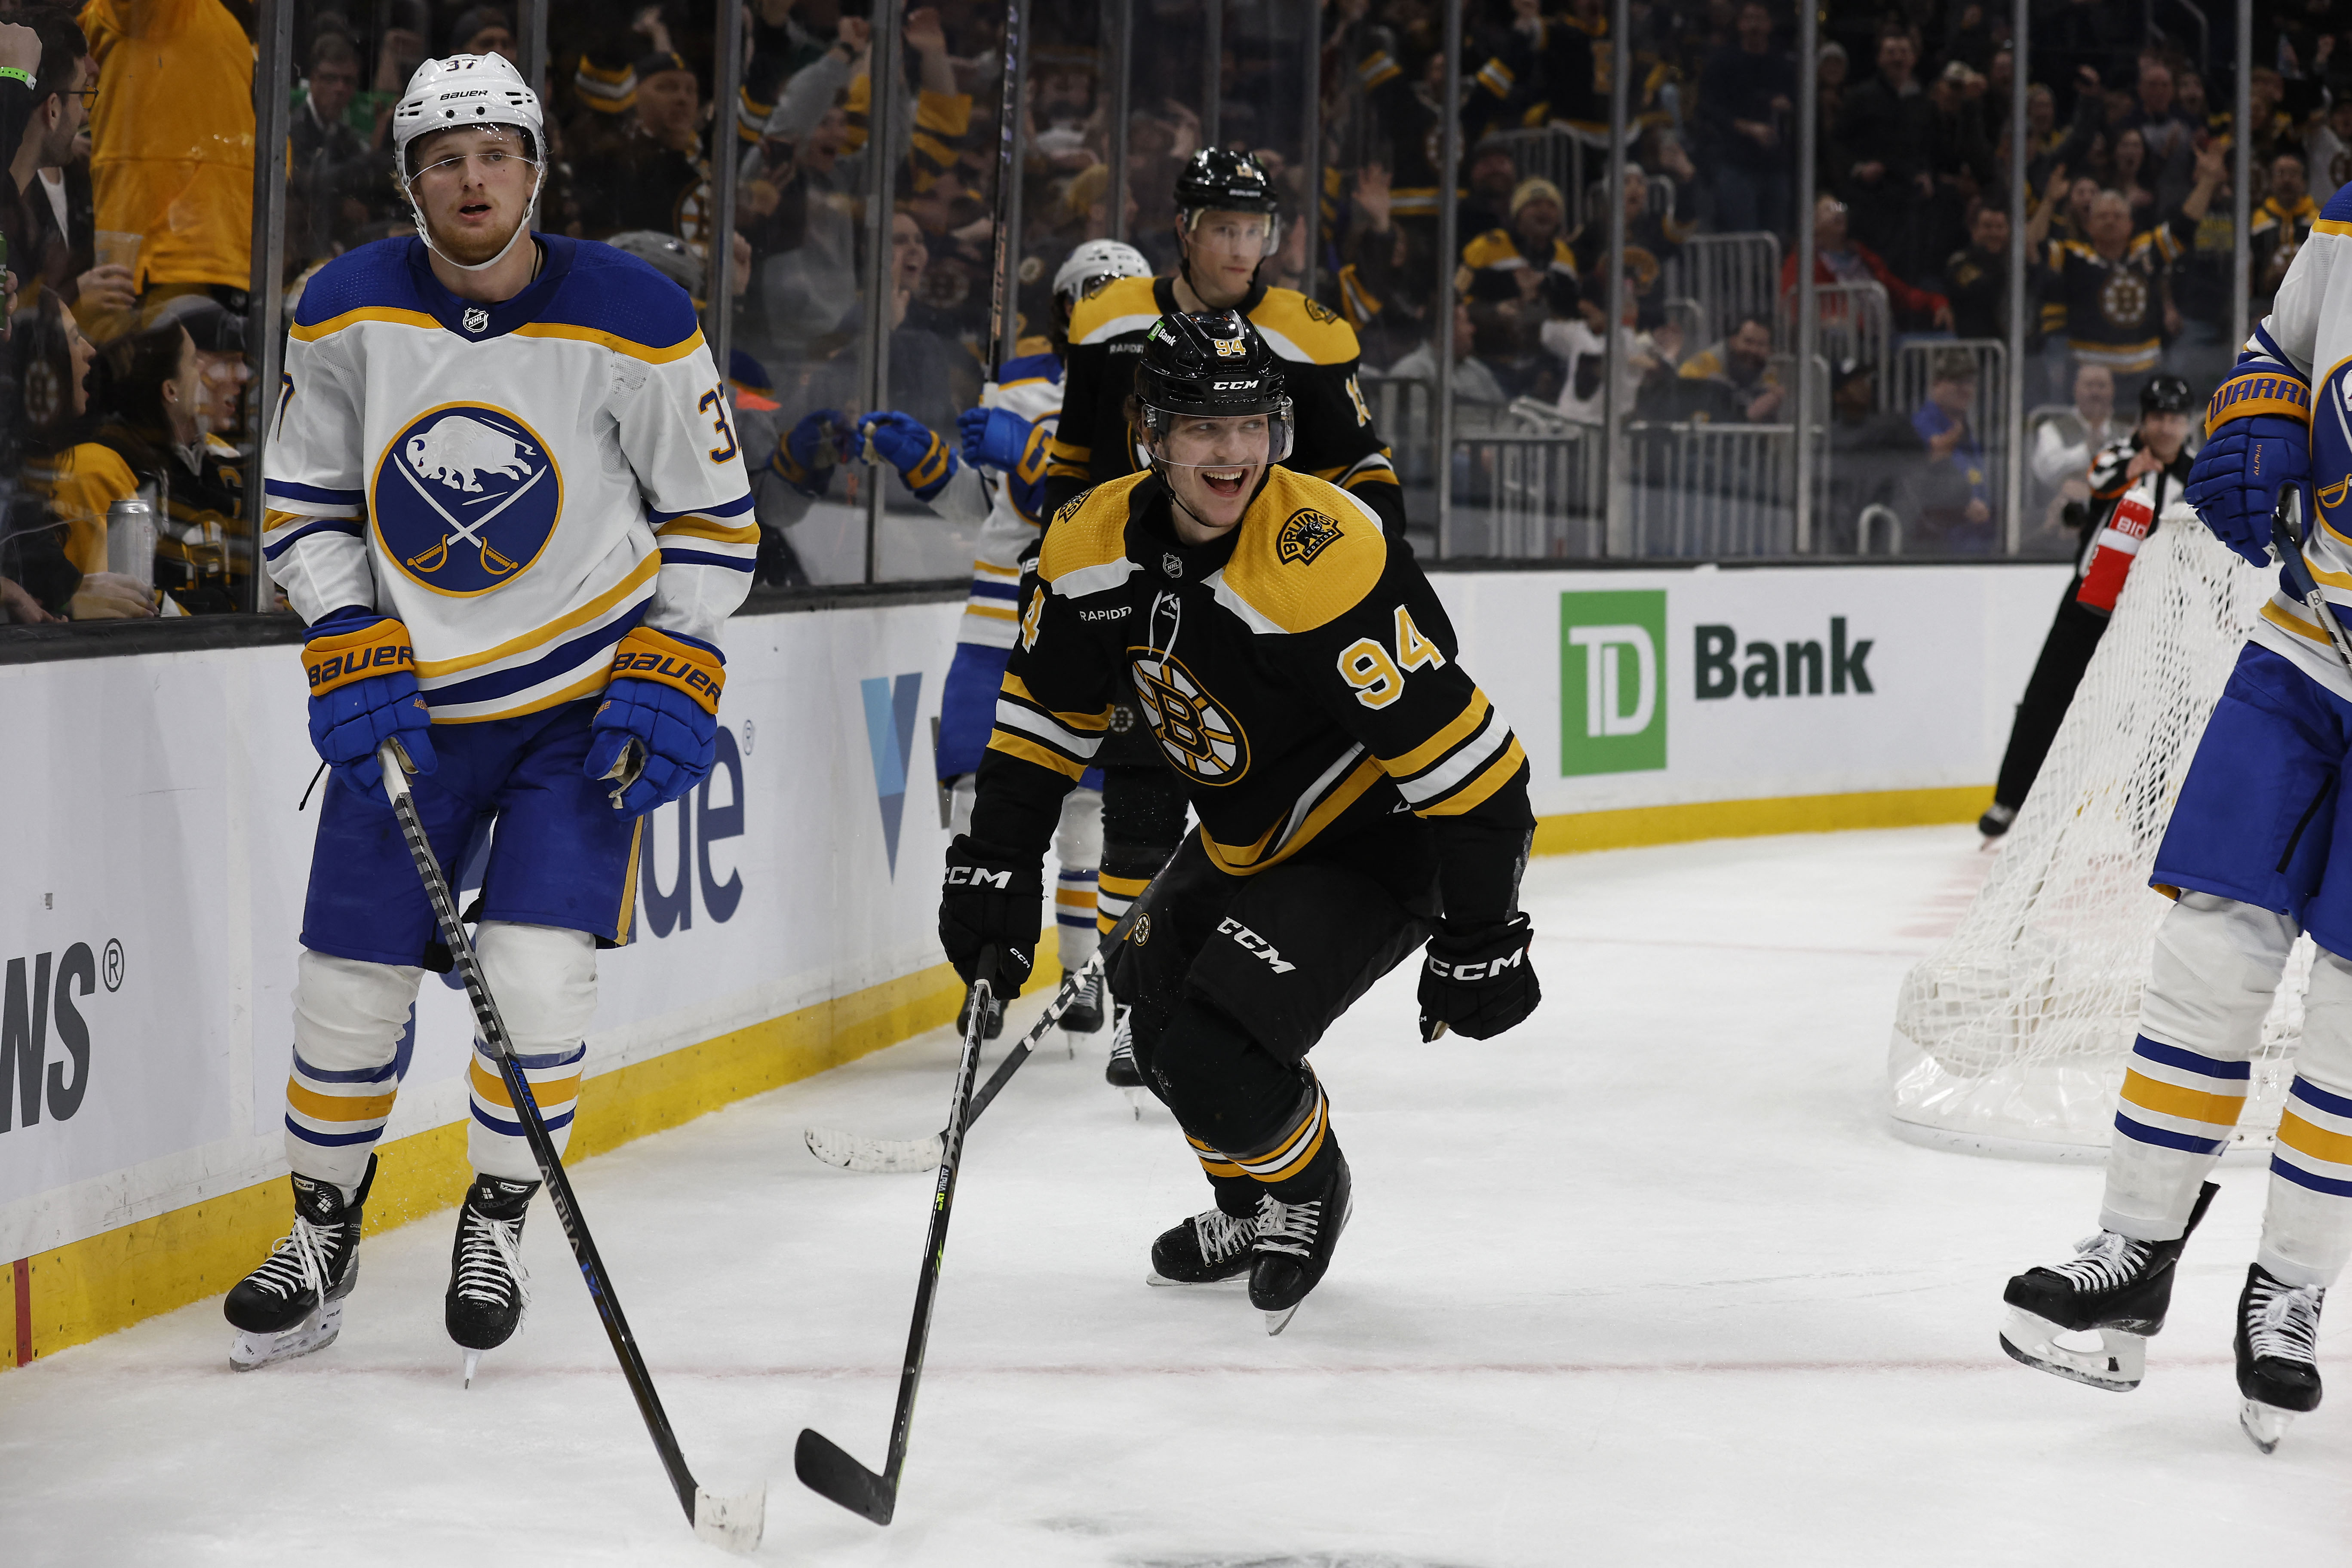 Rangers fall to 0-2 with Patrick Kane, lose 4-2 to Bruins